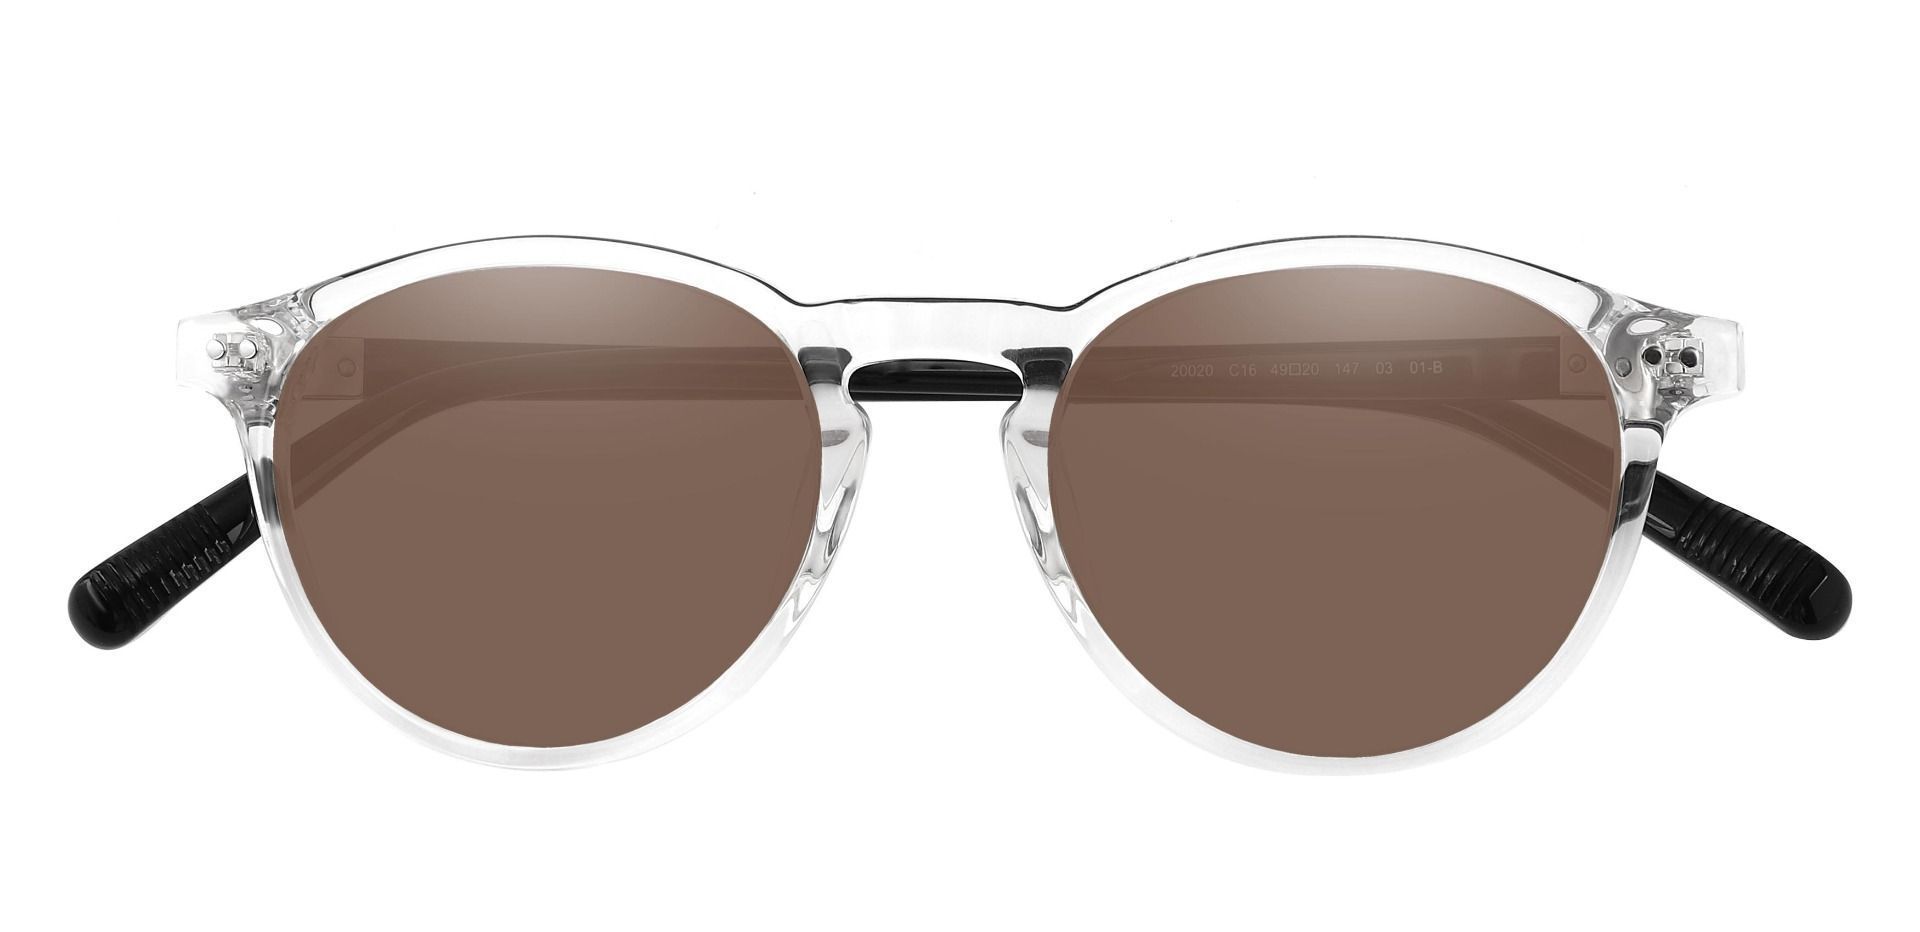 Monarch Oval Reading Sunglasses - Clear Frame With Brown Lenses